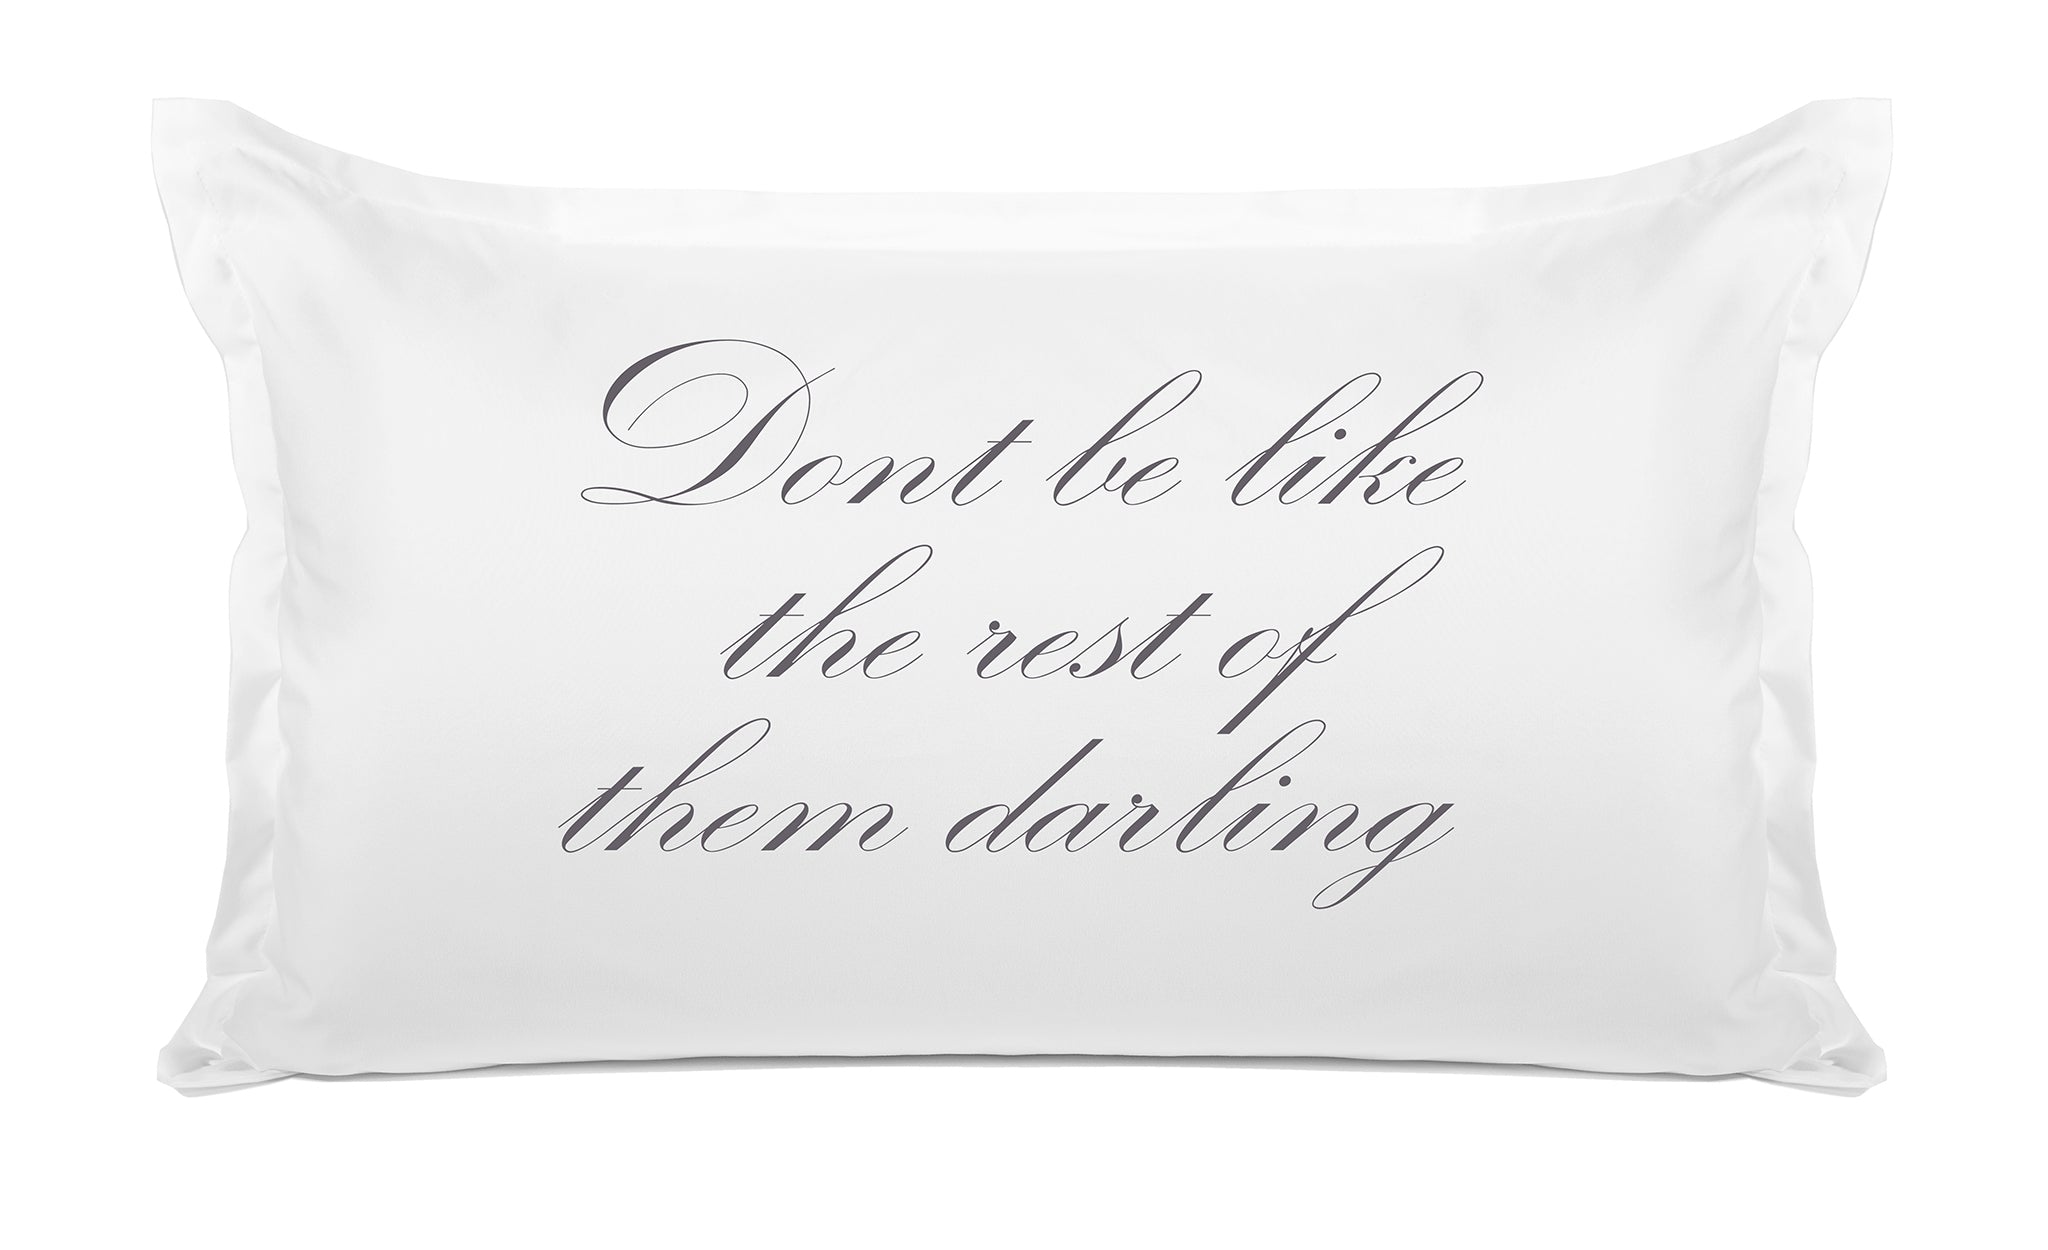 Don't Be Like The Rest Of Them Darling - Inspirational Quotes Pillowcase Collection-Di Lewis